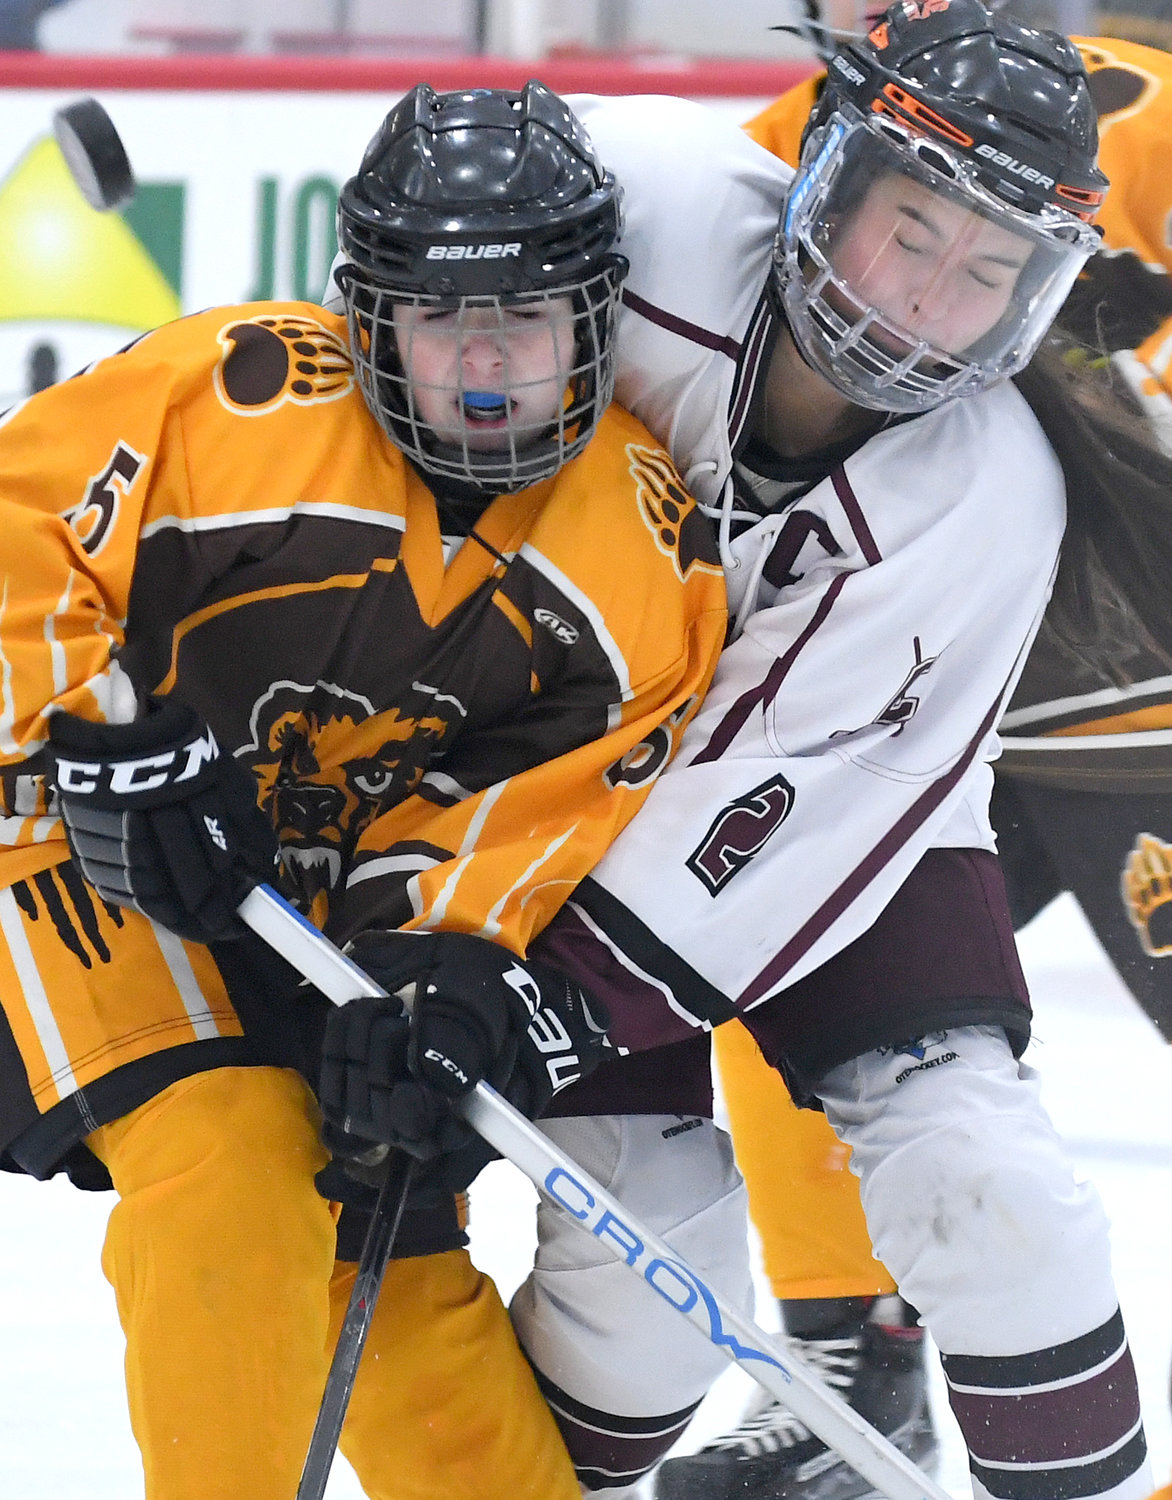 Clinton co-captain Sadie Davignon, right, collides with a Canton player in front of the Golden Bears' goalie in the first period Monday night at the Nexus Center in Utica. Clinton won 2-1.